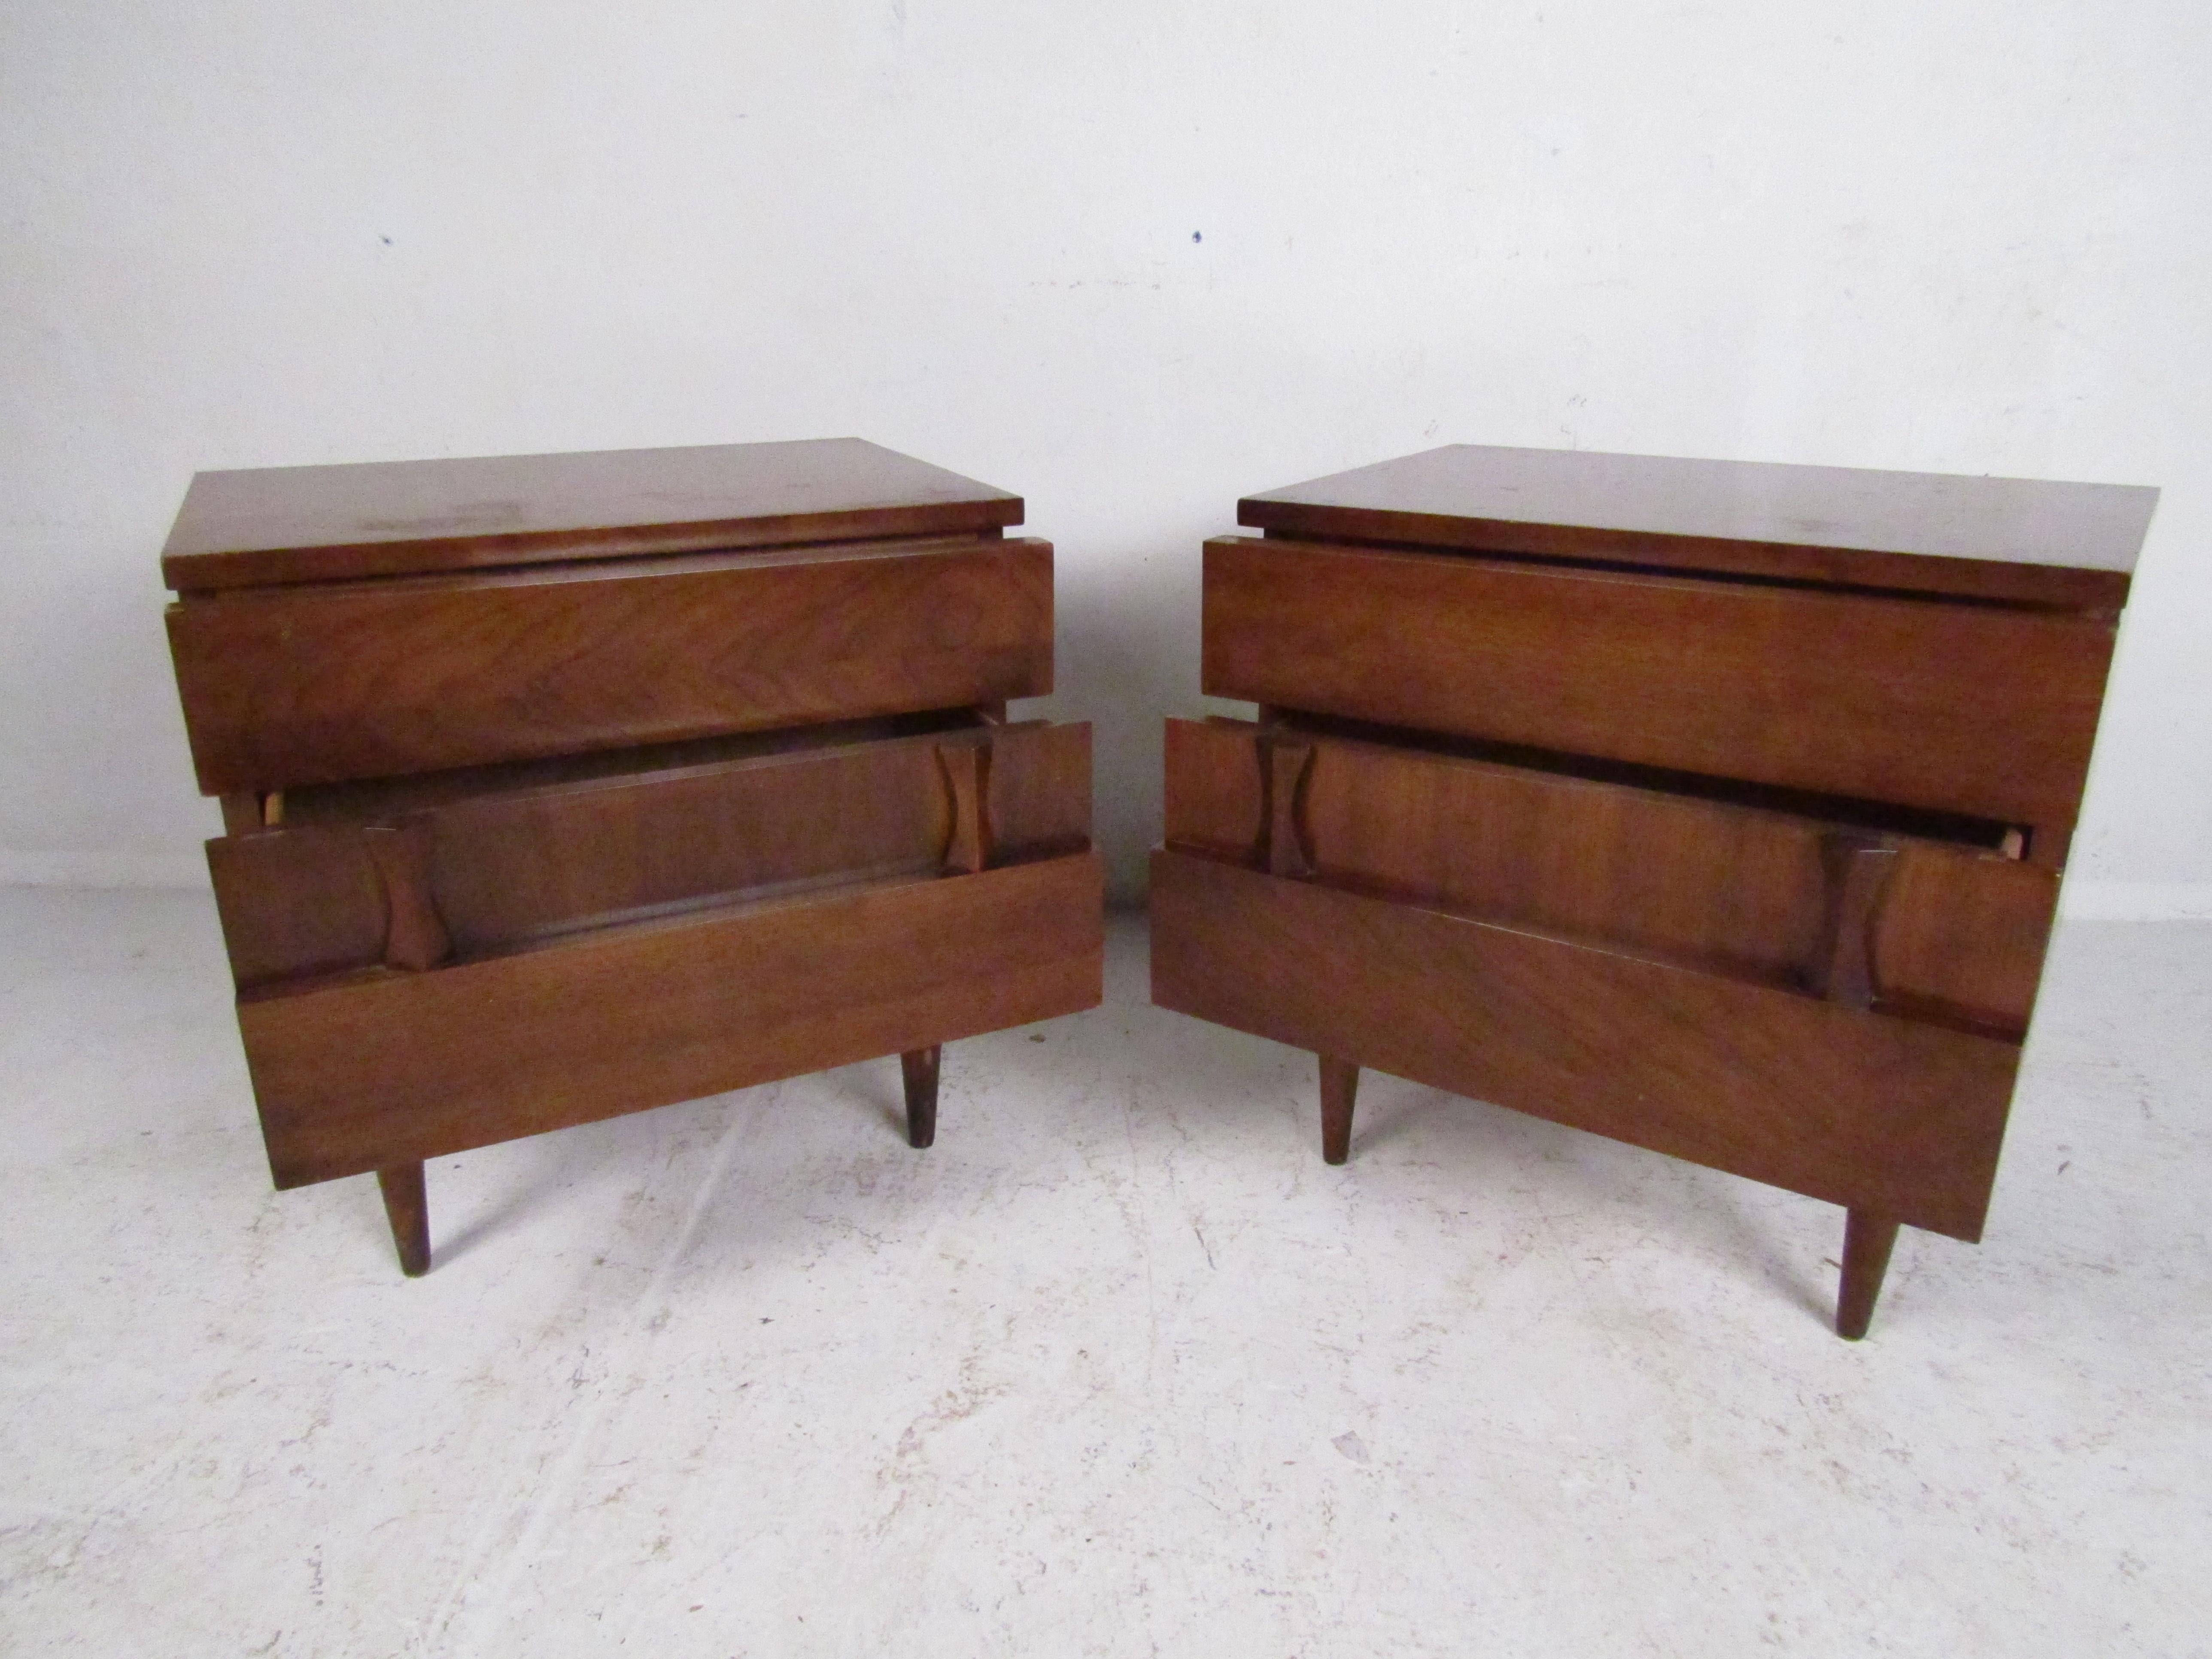 Stylish pair of Mid-Century Modern nightstands manufactured by American of Martinsville. Well-built frame with walnut veneer exterior. A nice addition to any modern interior. Please confirm item location with dealer (NJ or NY).